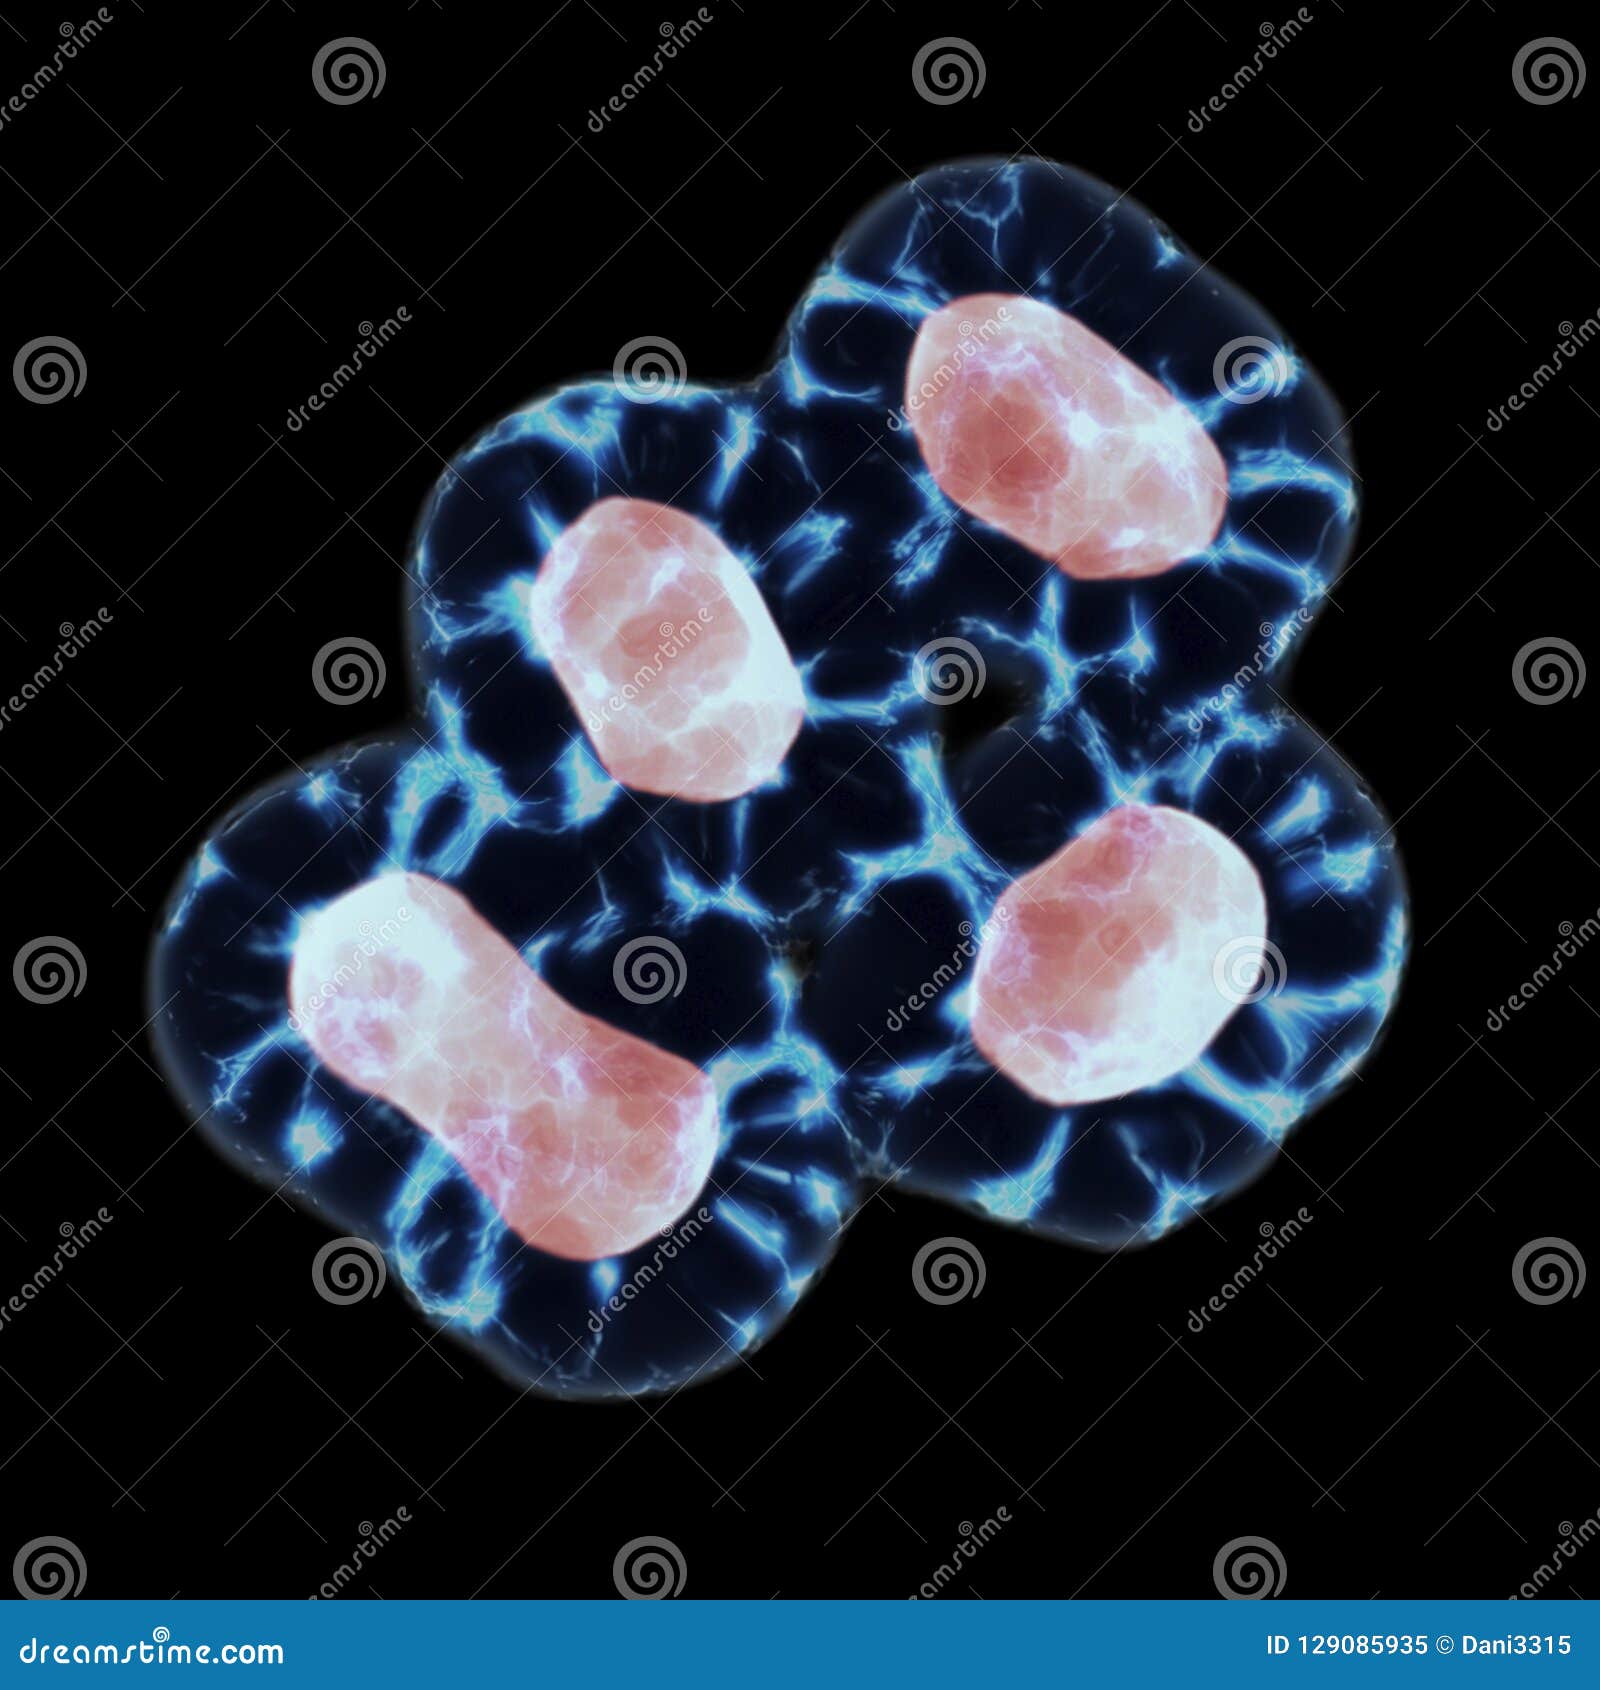 meiosis in telophase and cytokinesis stage, division of the cytoplasm into two daughter cells. 3d render